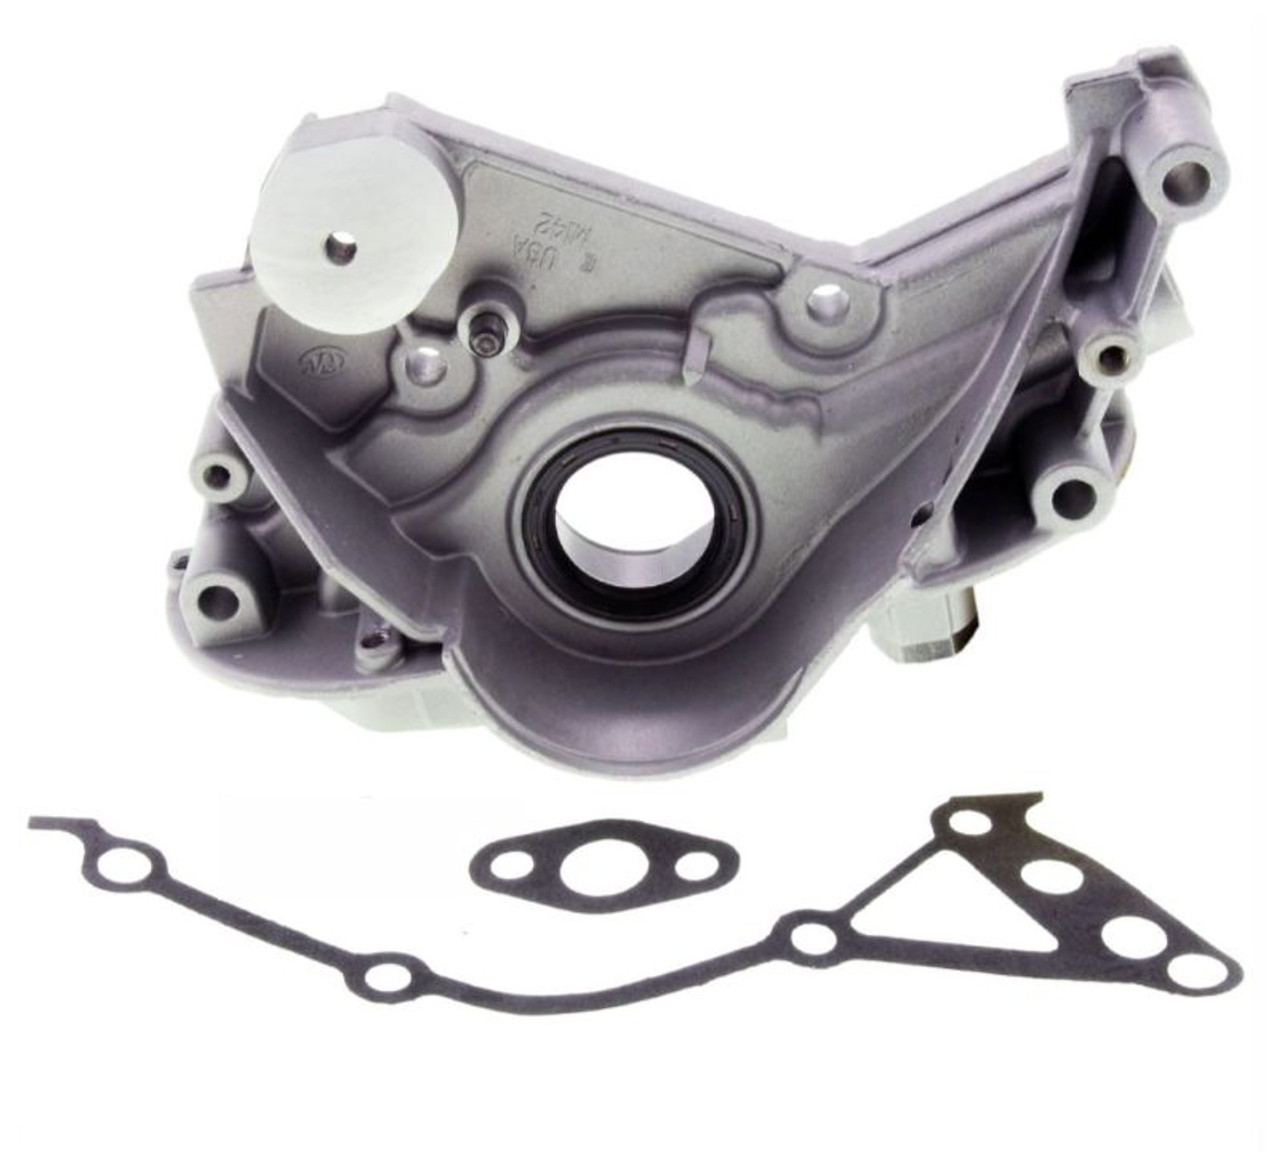 1999 Plymouth Grand Voyager 3.0L Engine Oil Pump EP142 -91